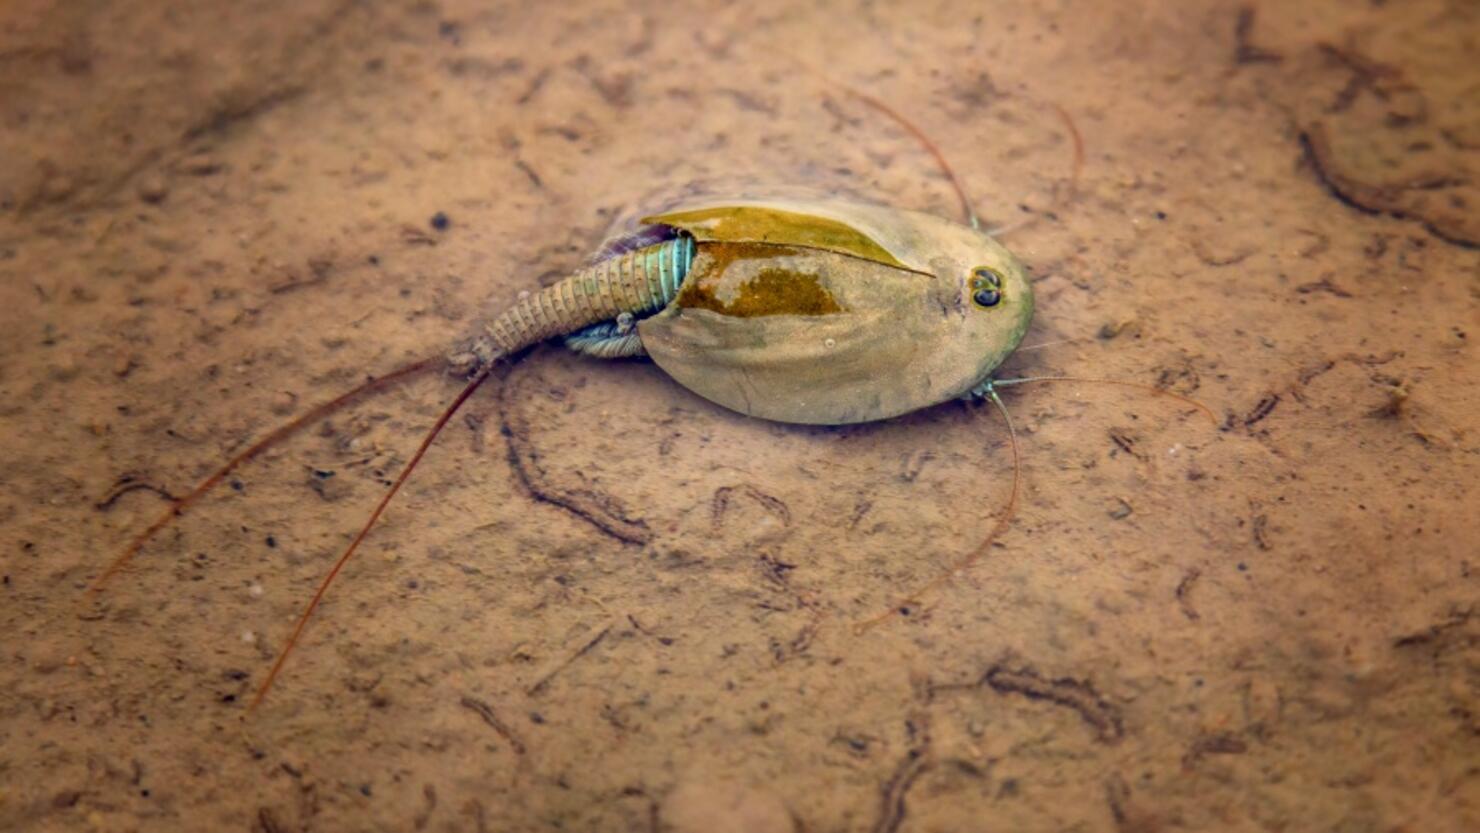 Rare 'Living Fossil' Creatures Surface In Arizona | iHeart